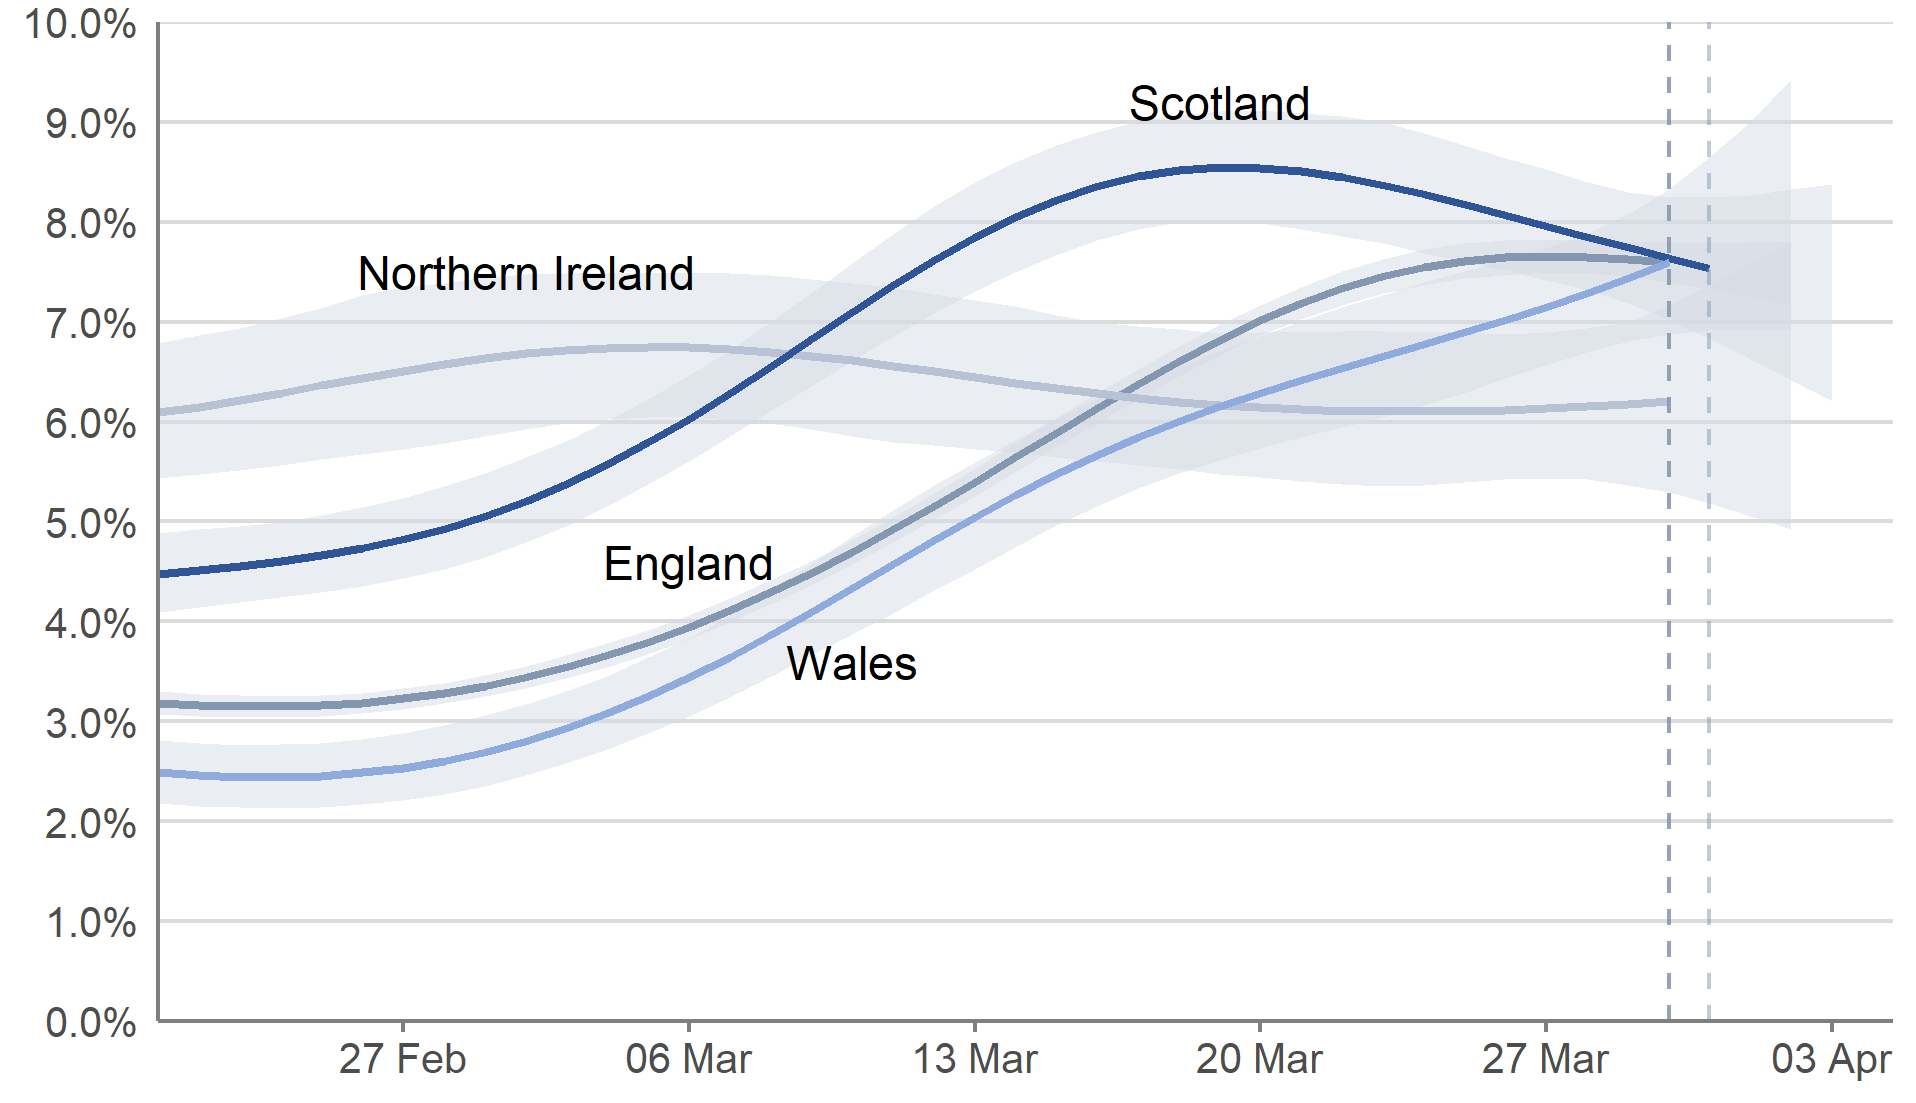 In the most recent week (28 March to 3 April for Scotland, and 27 March to 2 April for England, Wales and Northern Ireland), the estimated percentage of people testing positive remained high in England, increased in Wales and decreased in Scotland. In Northern Ireland, the trend in the percentage of people testing positive was uncertain in the most recent week.